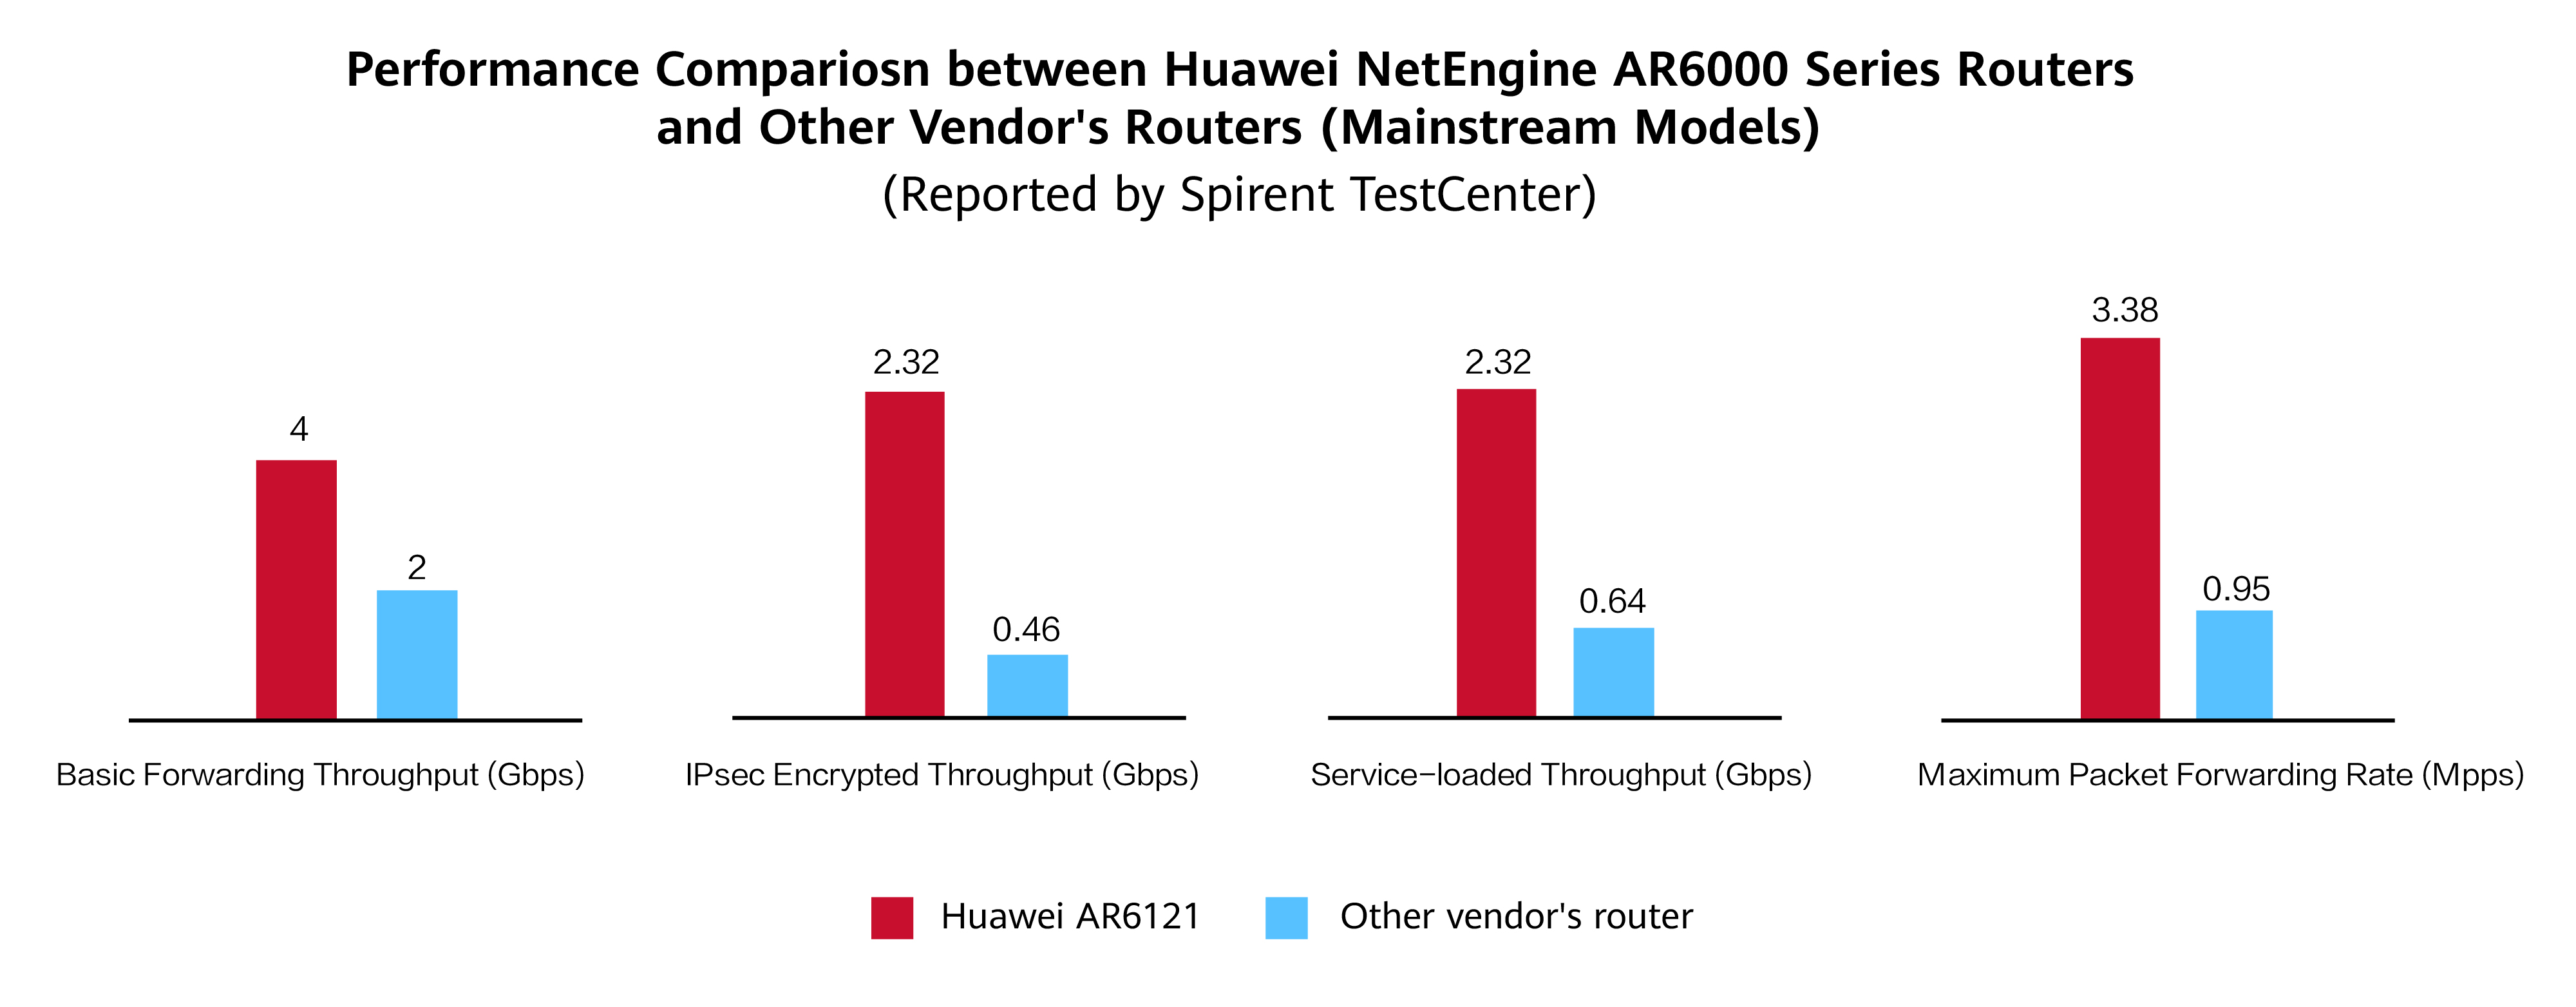 Bar graphs showing the results of performance comparison tests between Huawei's NetEngine AR routers and comparable products